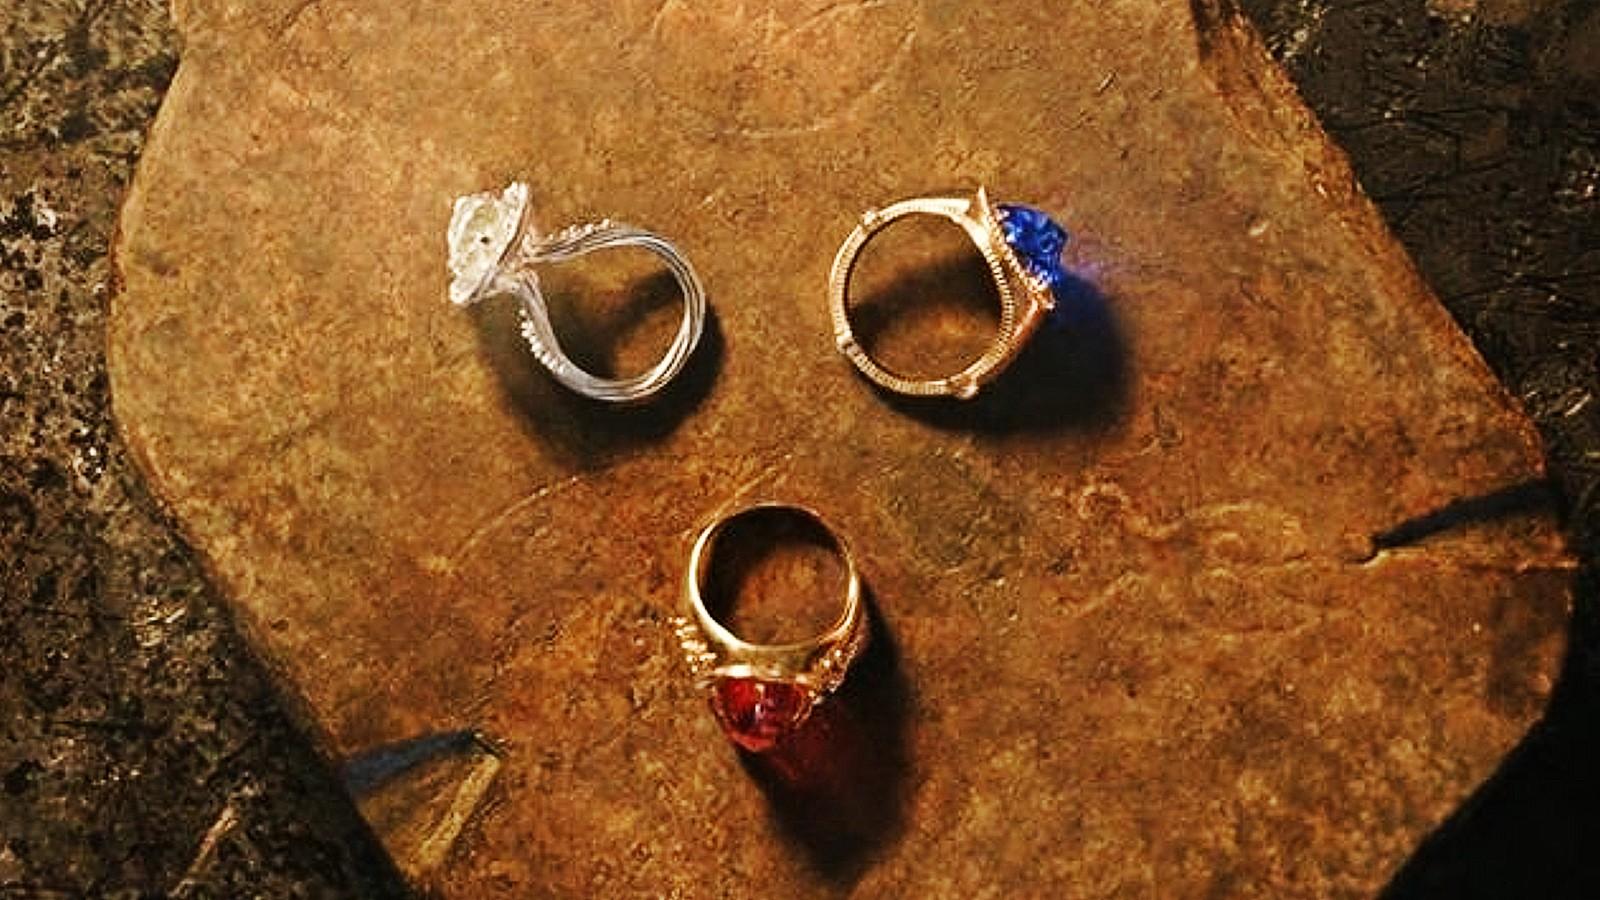 The Rings of Power three elven rings explained